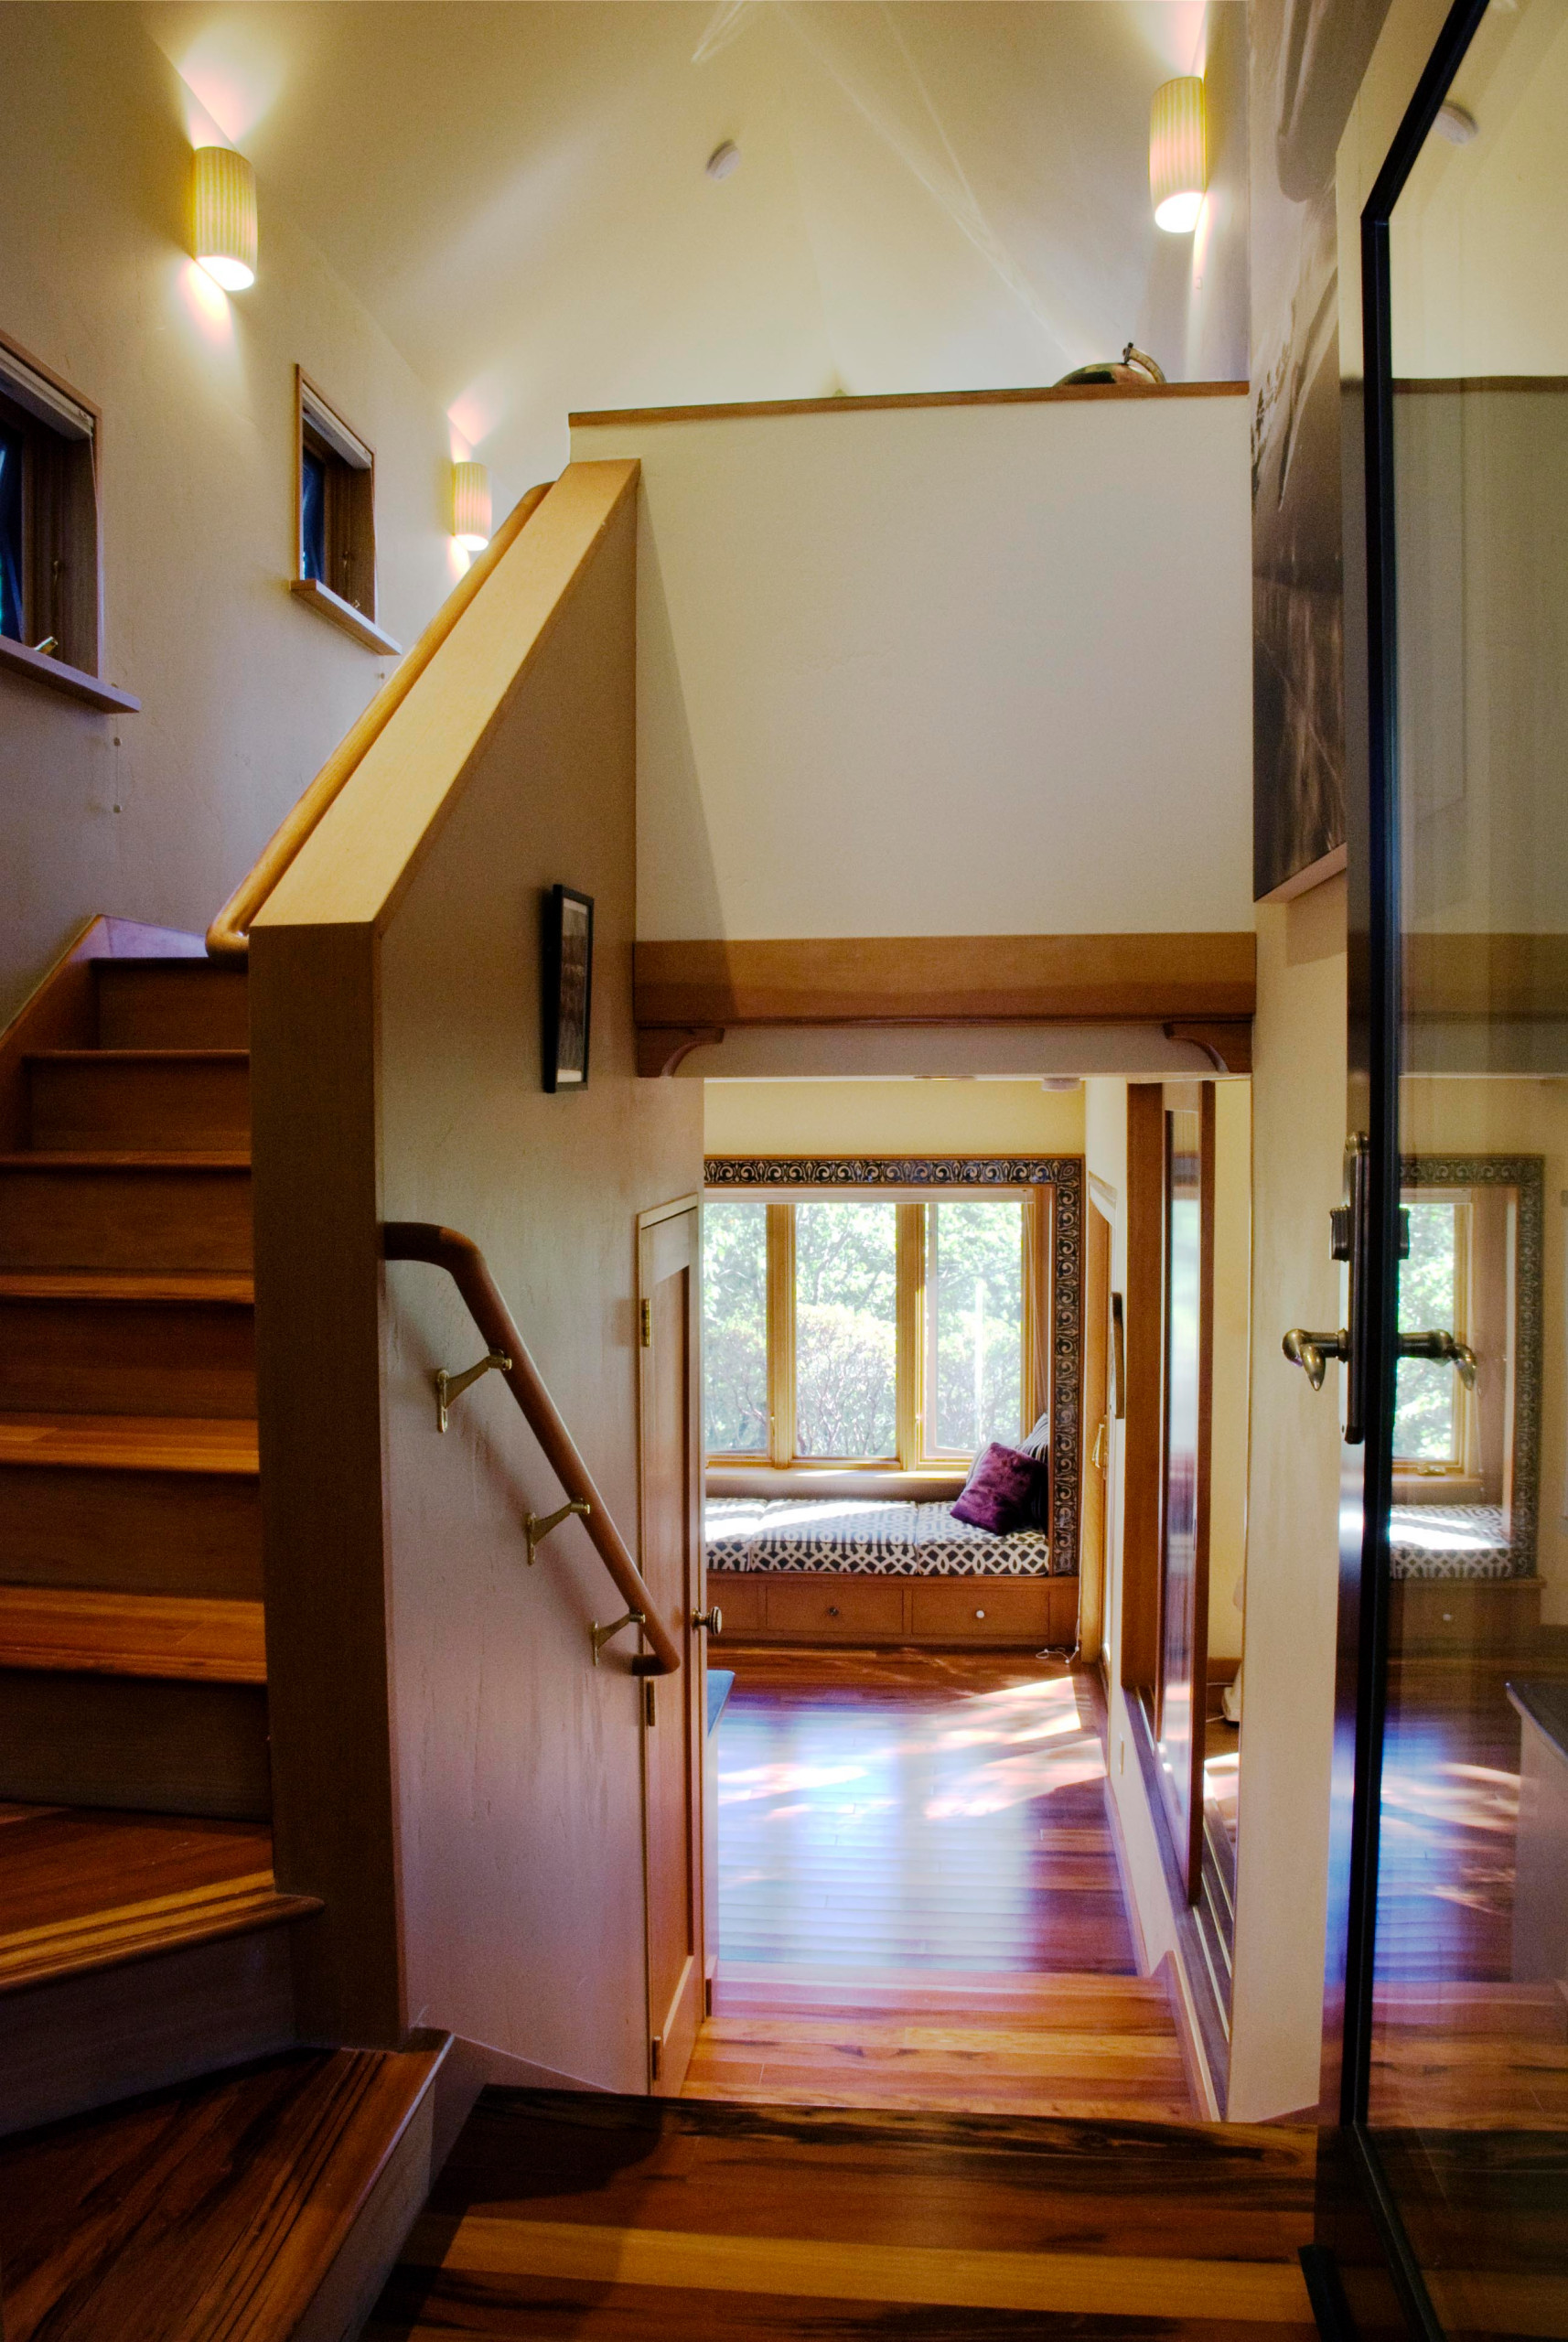 Entry with view to loft above and window seat below